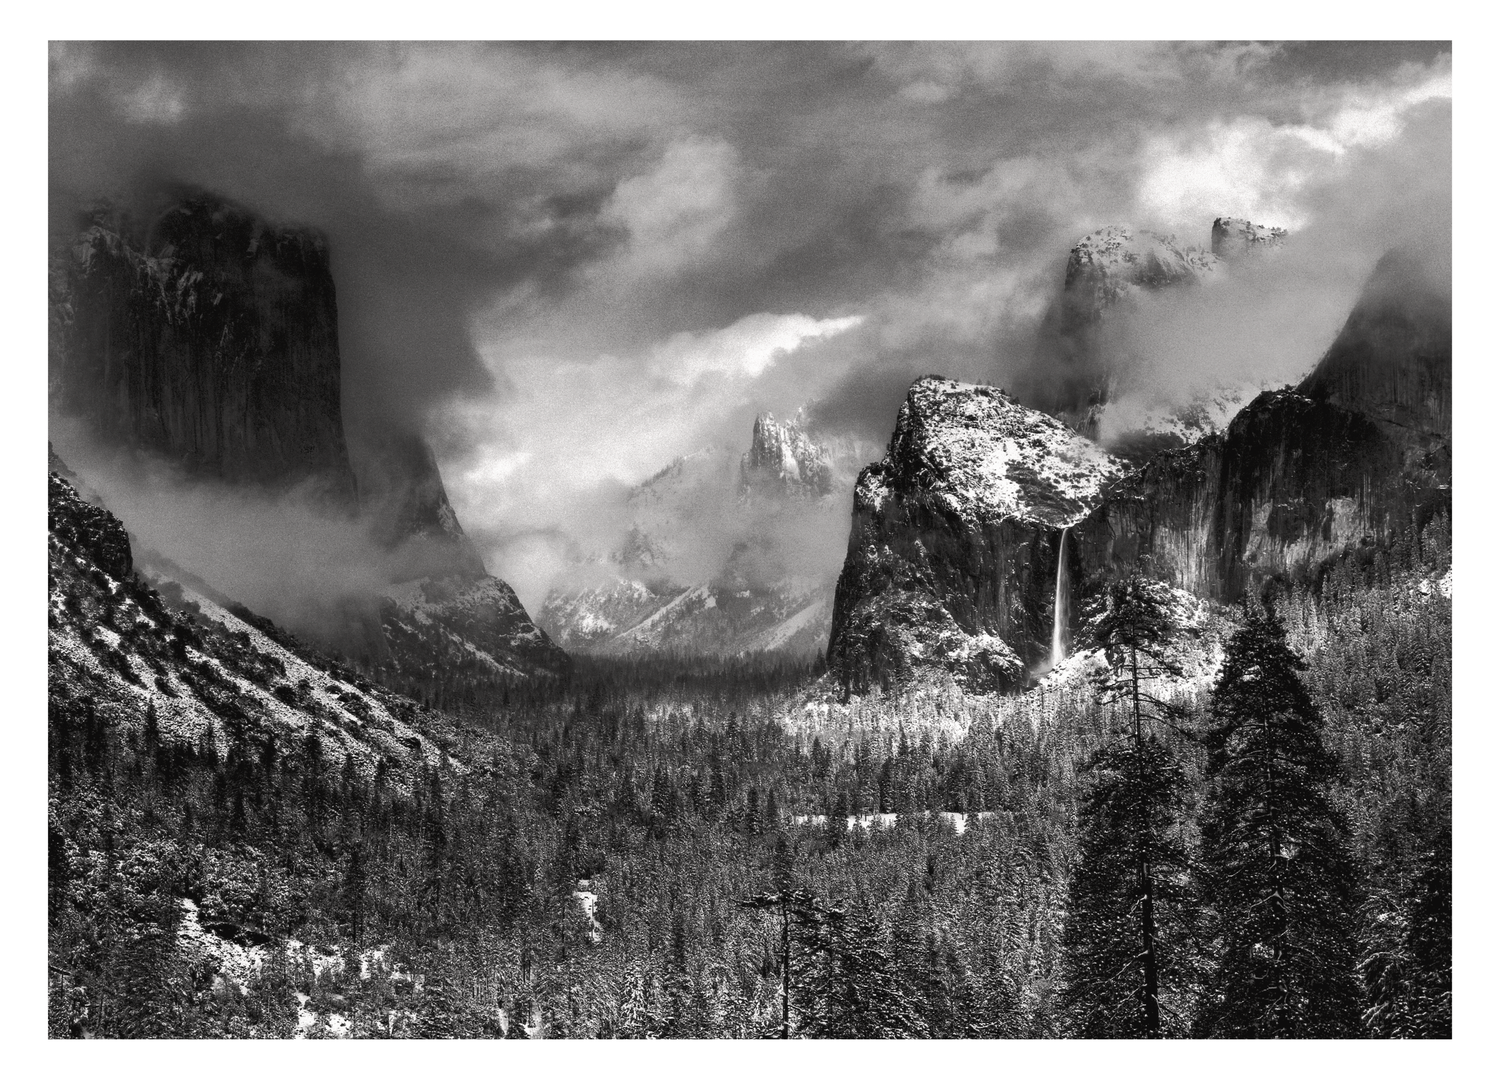 CLEARING WINTER STORM - ANSEL ADAMS HOLIDAY CARD